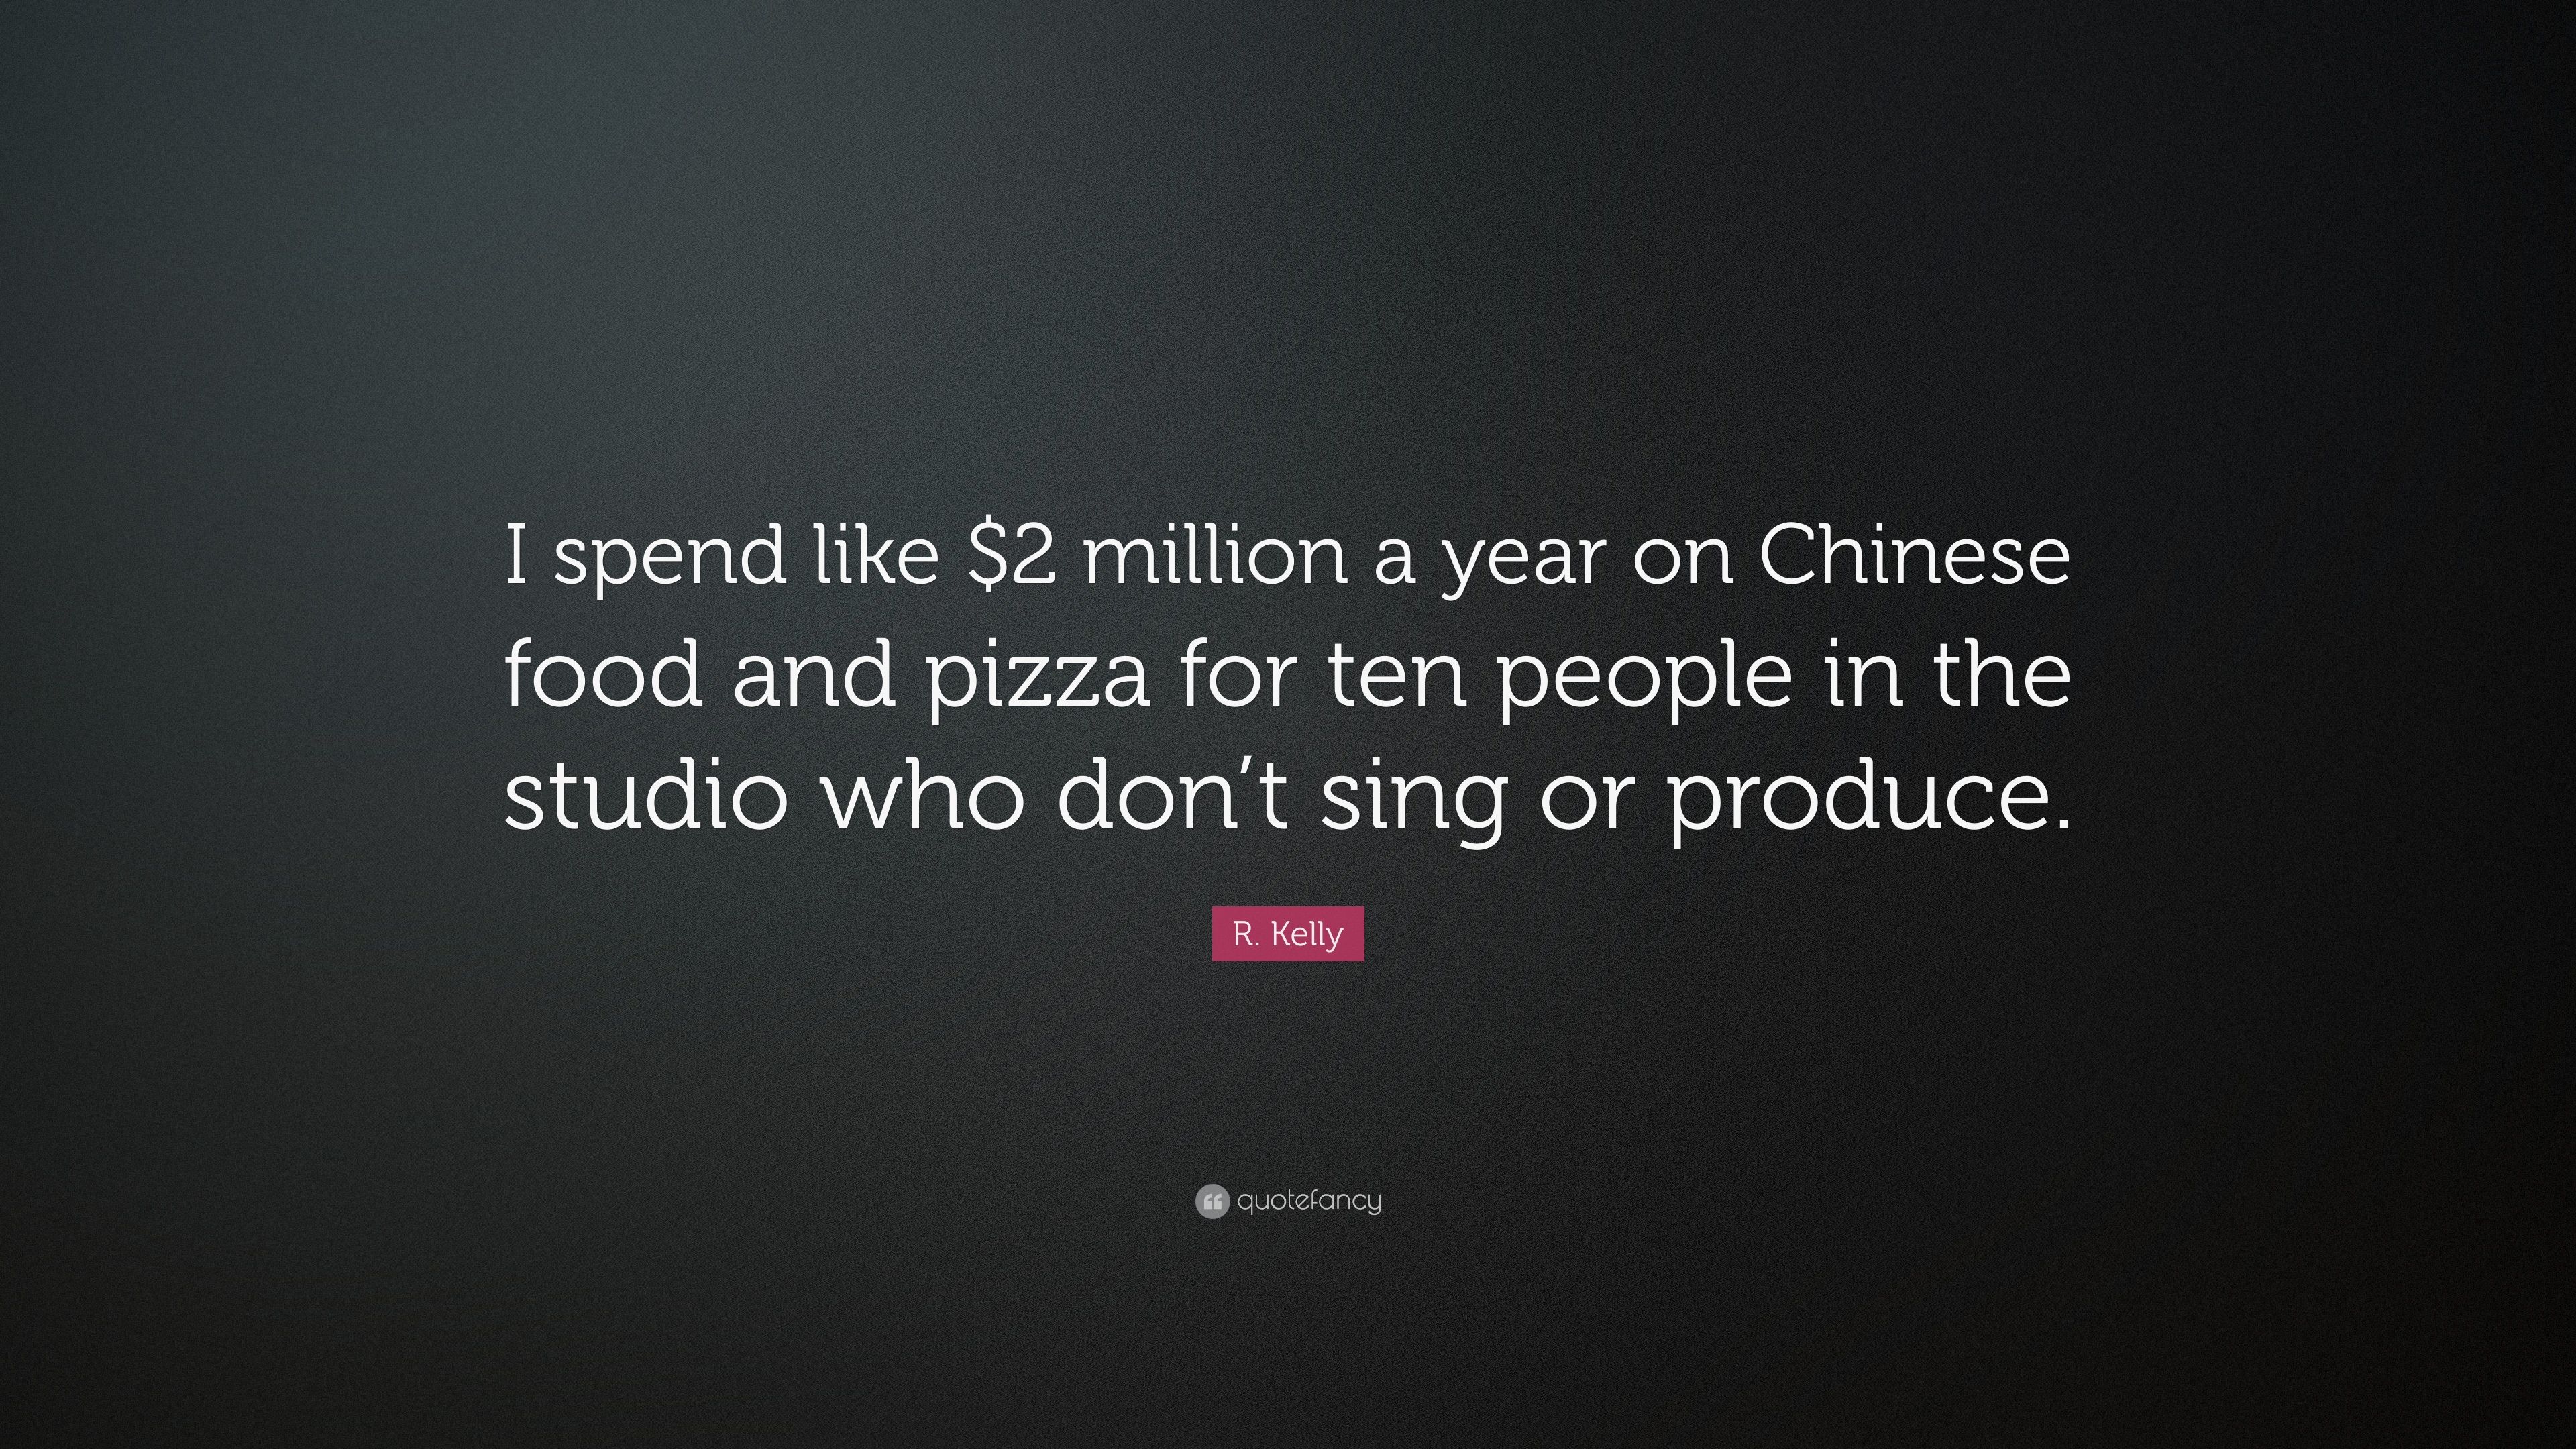 R. Kelly Quote: “I spend like $2 million a year on Chinese food